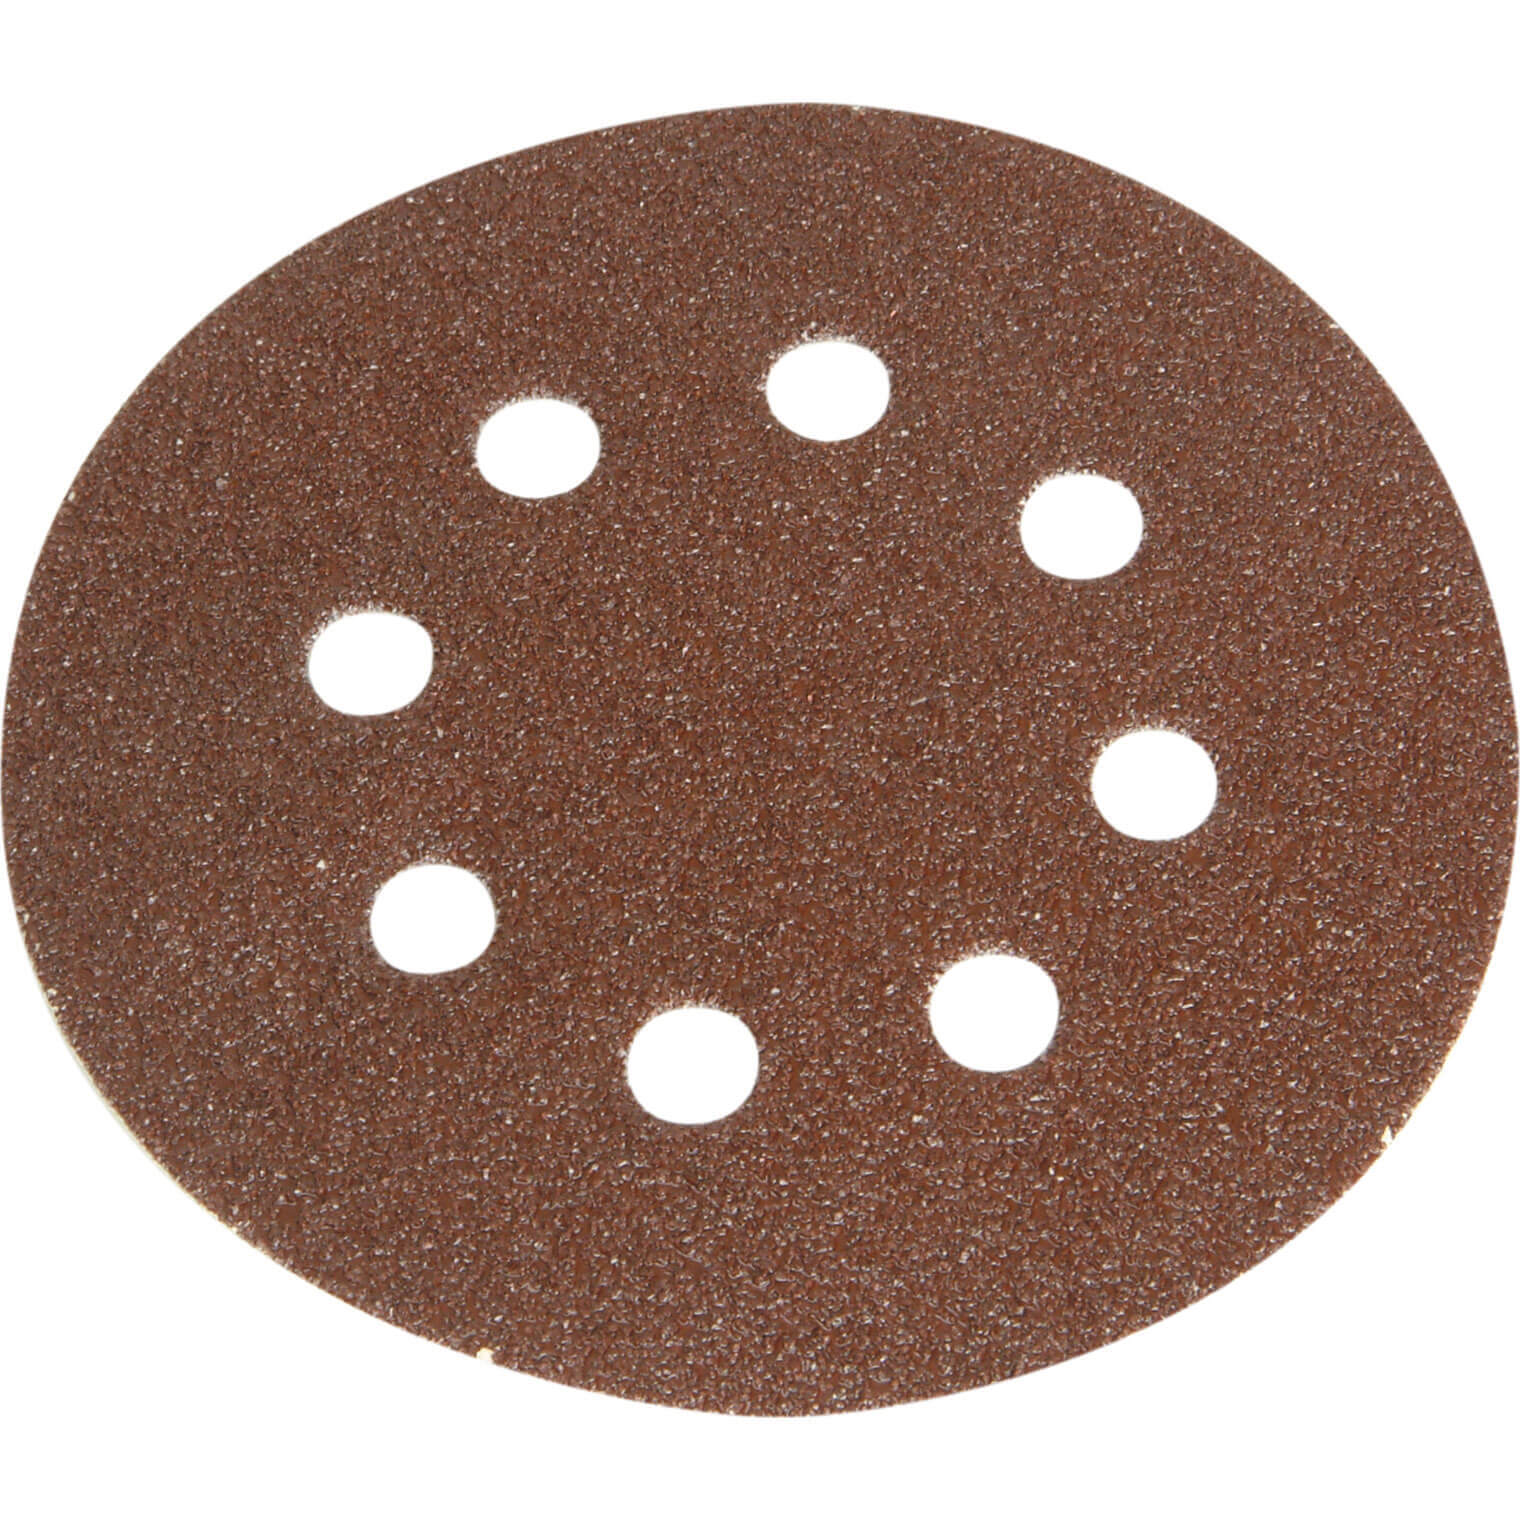 Photo of Faithfull 125mm Hook And Loop Perforated Sanding Discs 125mm Coarse Pack Of 5